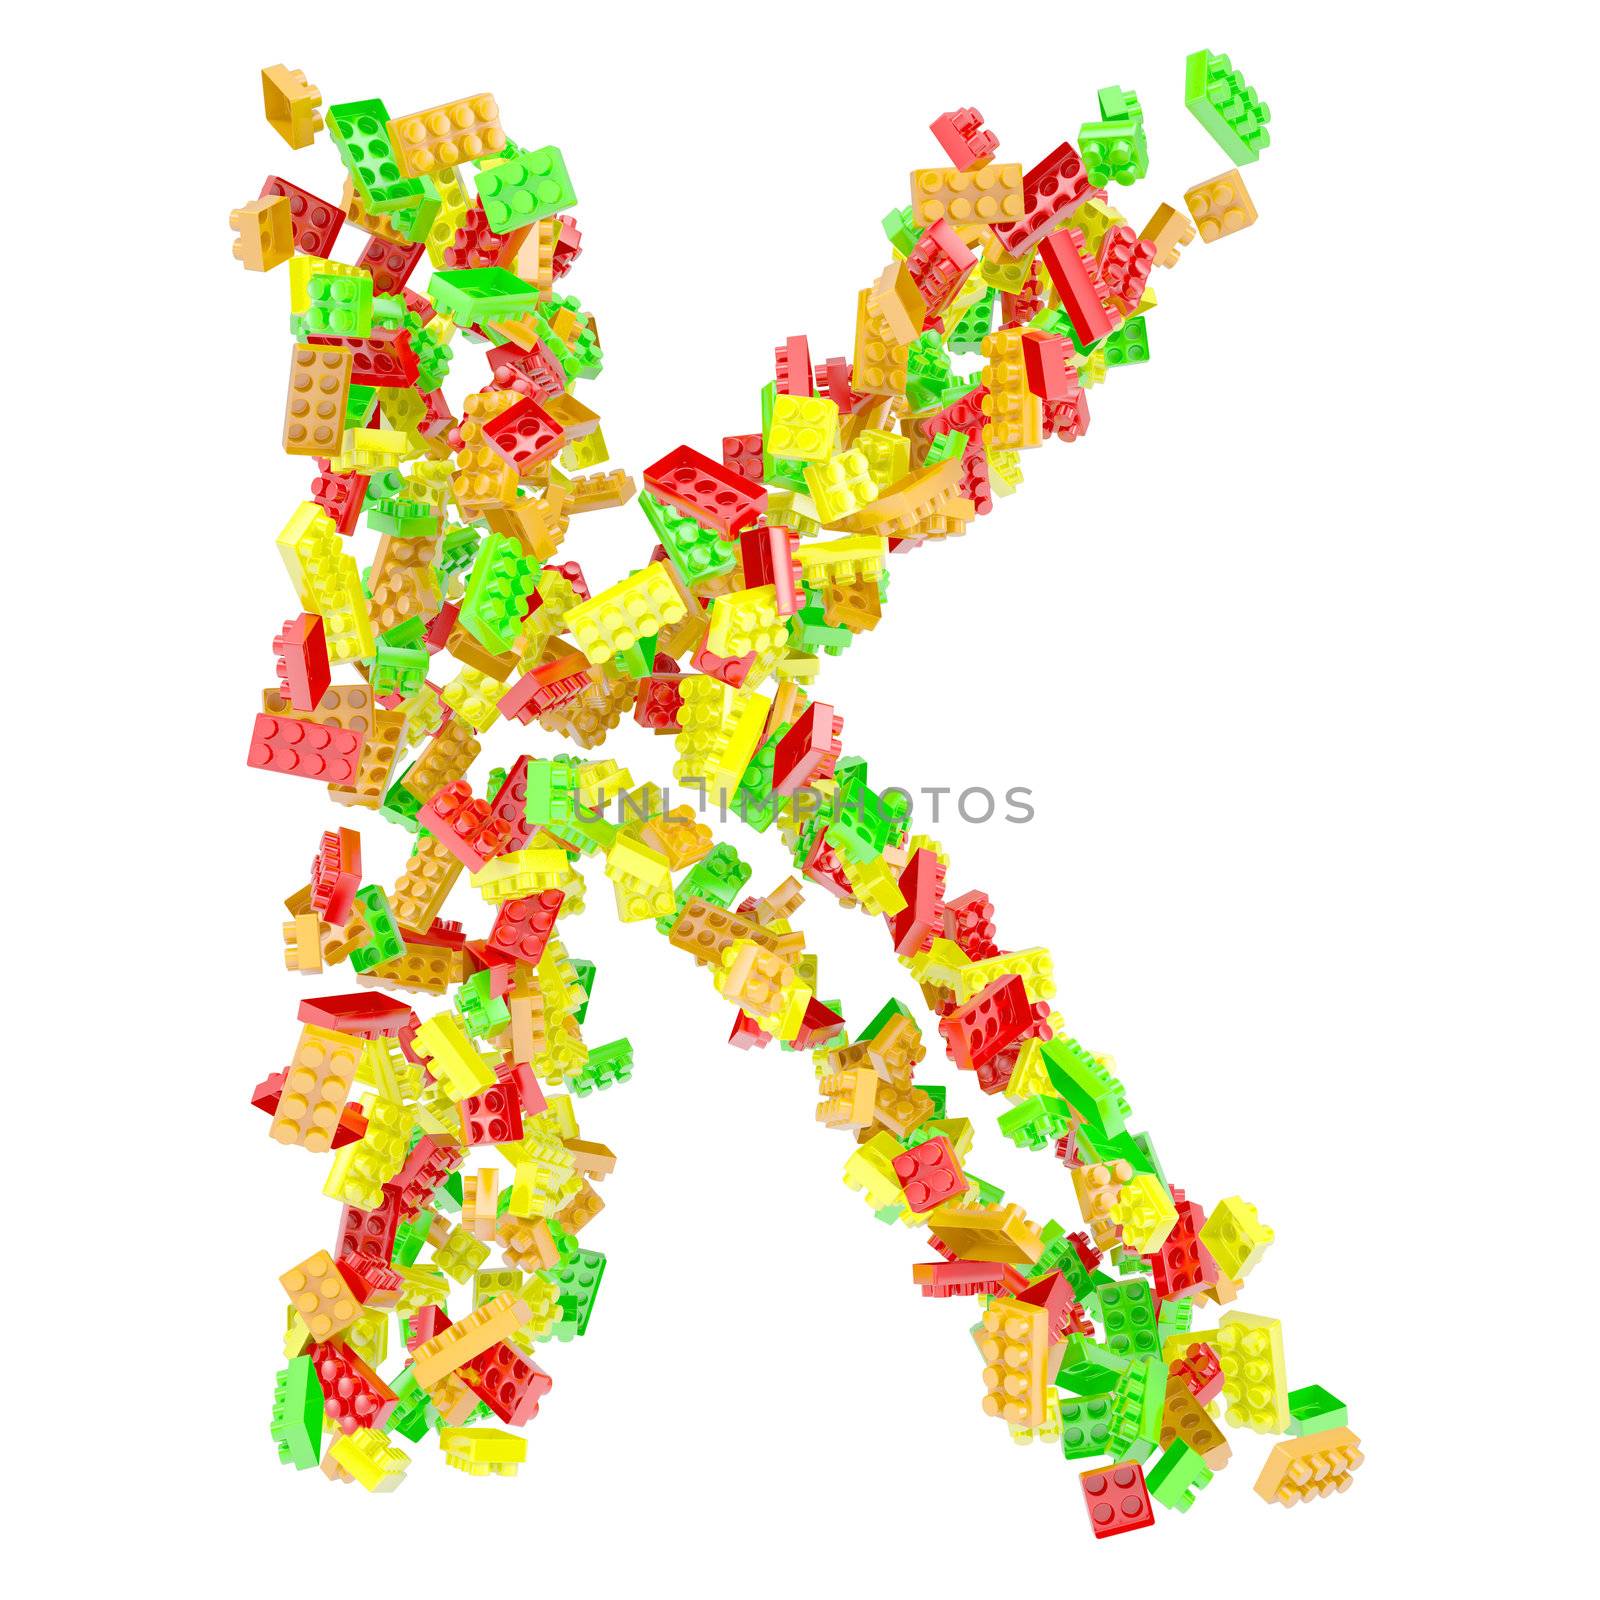 The letter K is made up of children's blocks by cherezoff